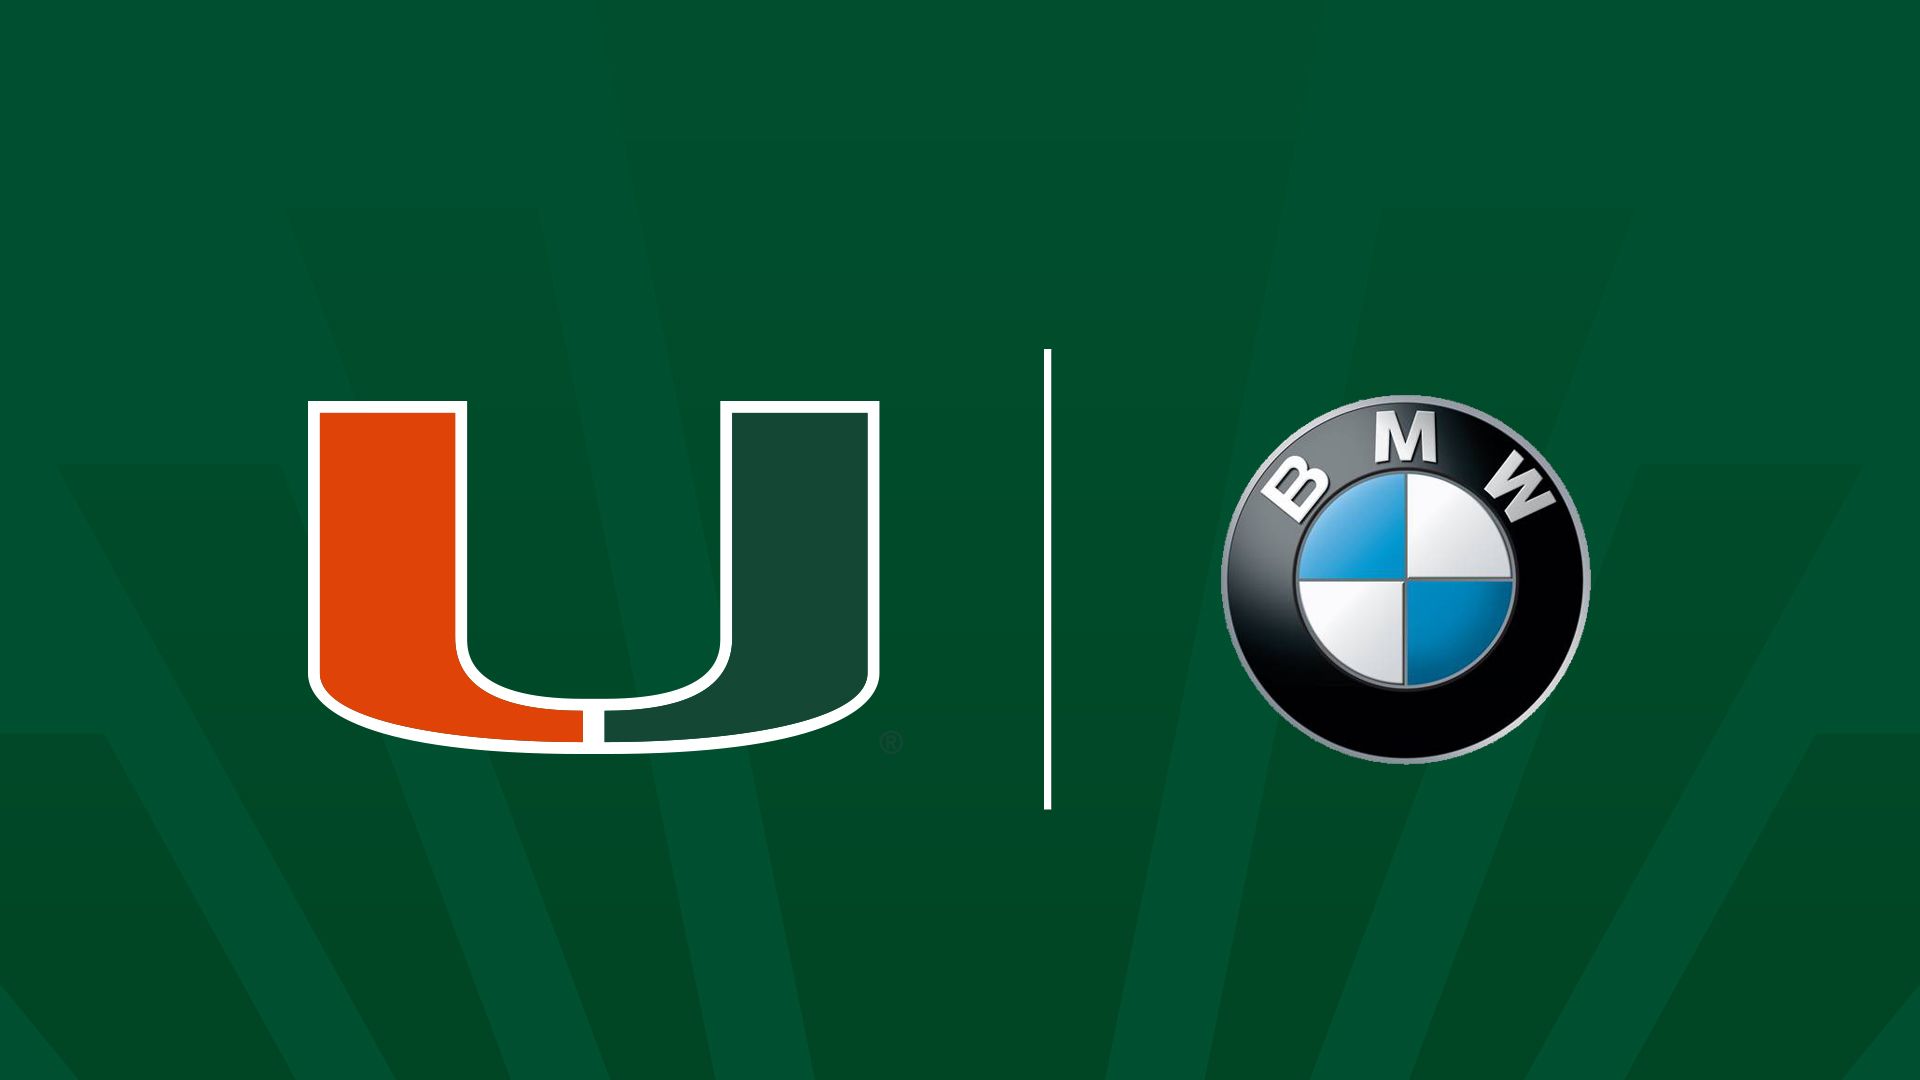 Hurricanes, The South Florida BMW Centers Introduce Relationship for Upcoming Season